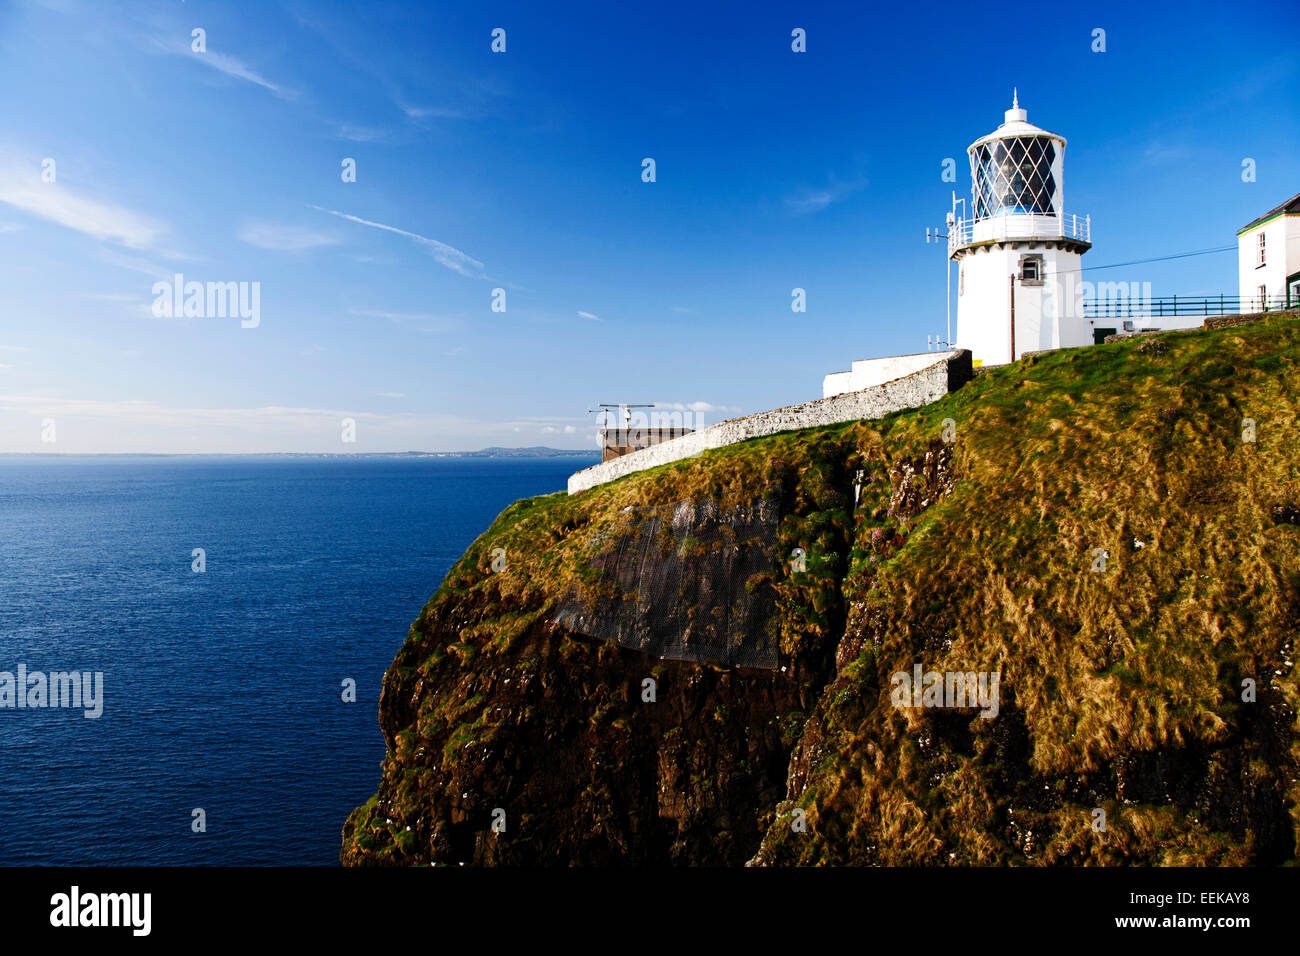 Blackhead lighthouse on clifftop in county antrim northern ireland Stock Photo